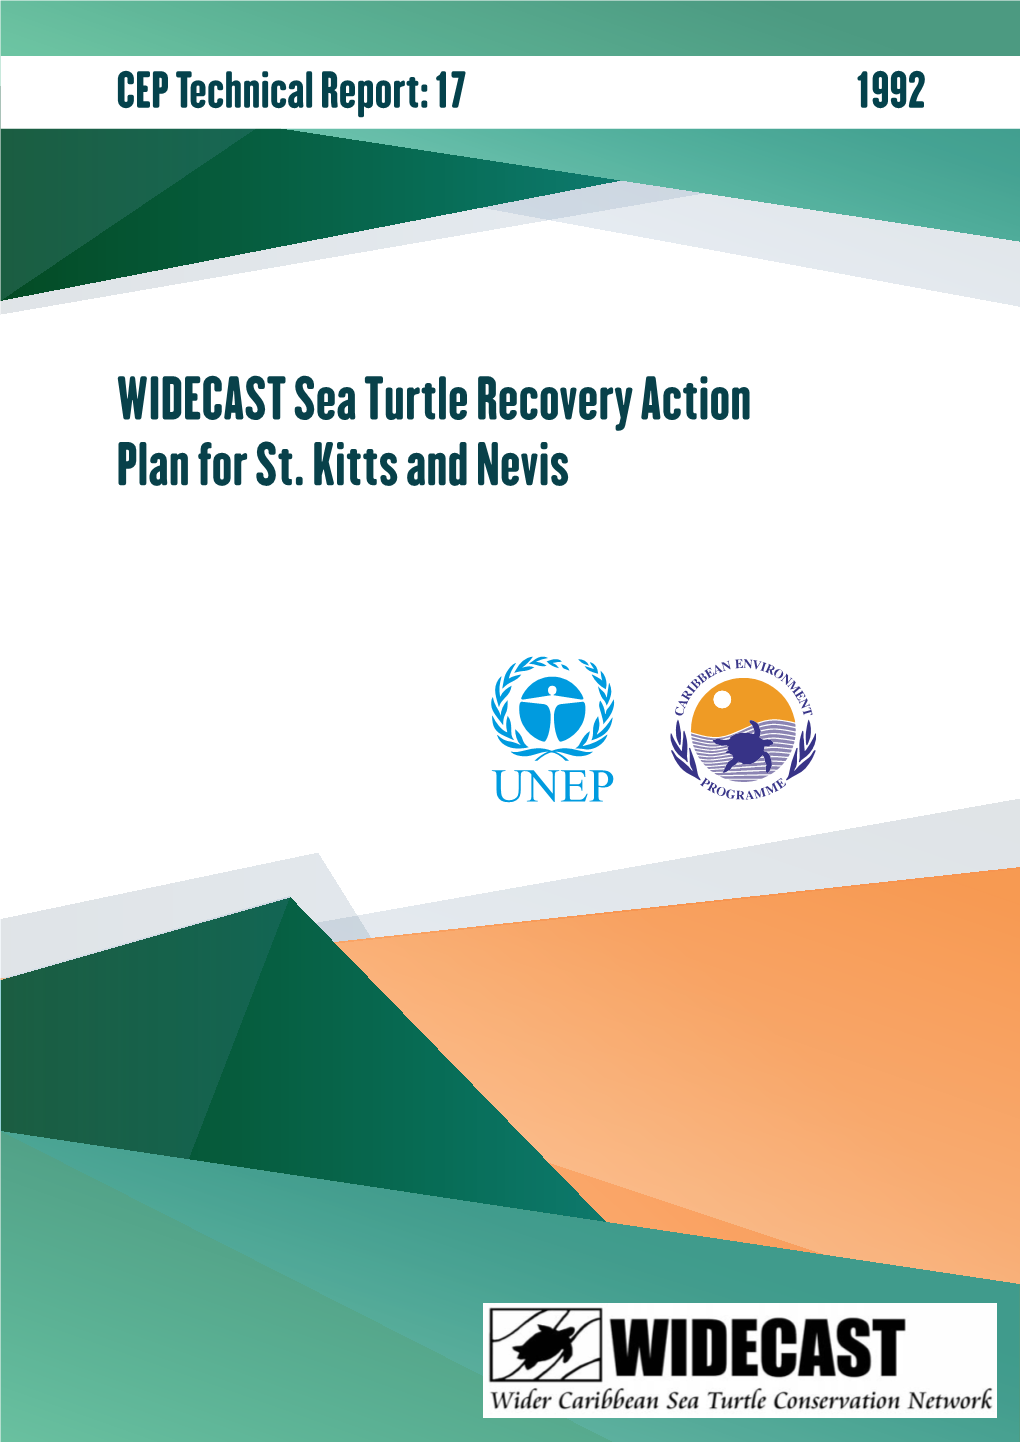 WIDECAST Sea Turtle Recovery Action Plan for St. Kitts and Nevis Note